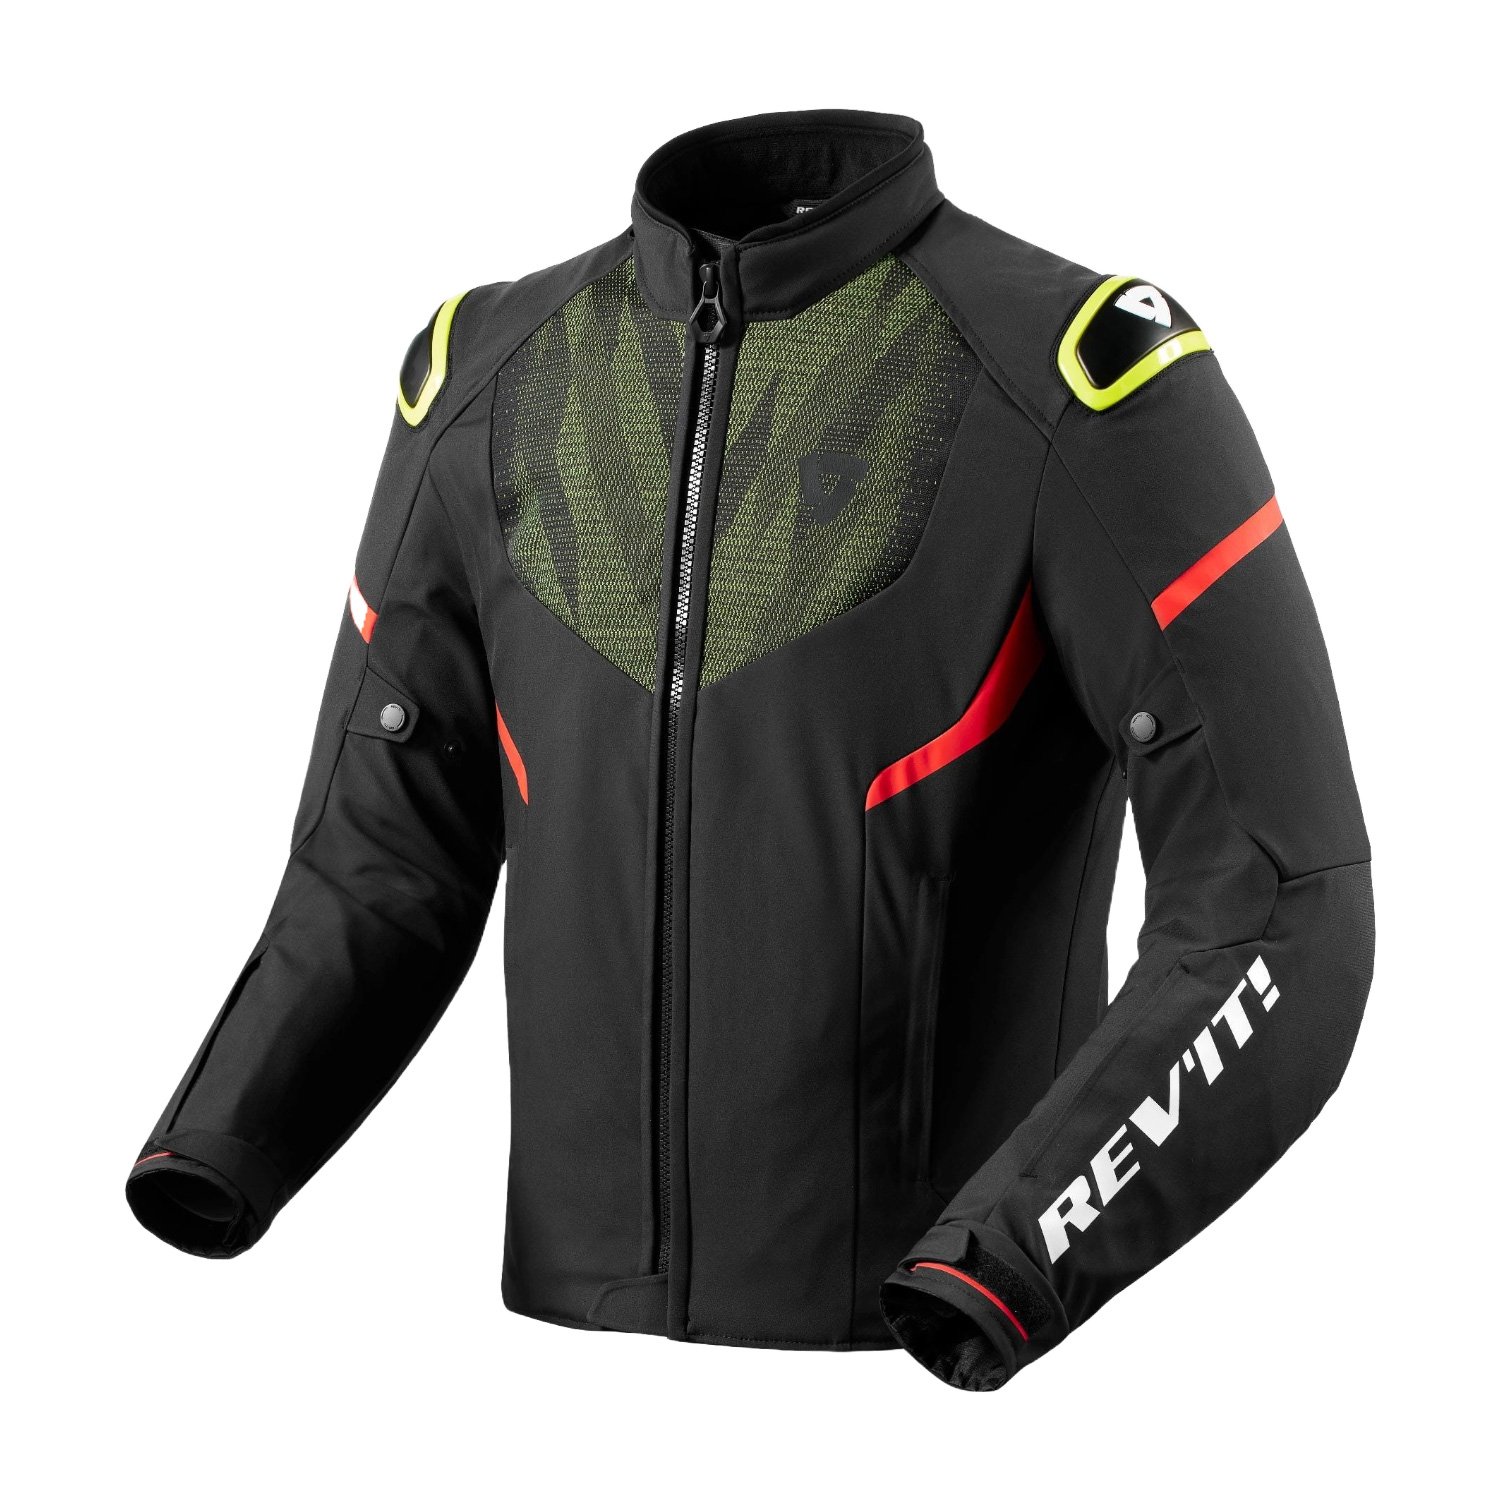 Image of REV'IT! Hyperspeed 2 H2O Jacket Black Neon Yellow Size 3XL ID 8700001367394